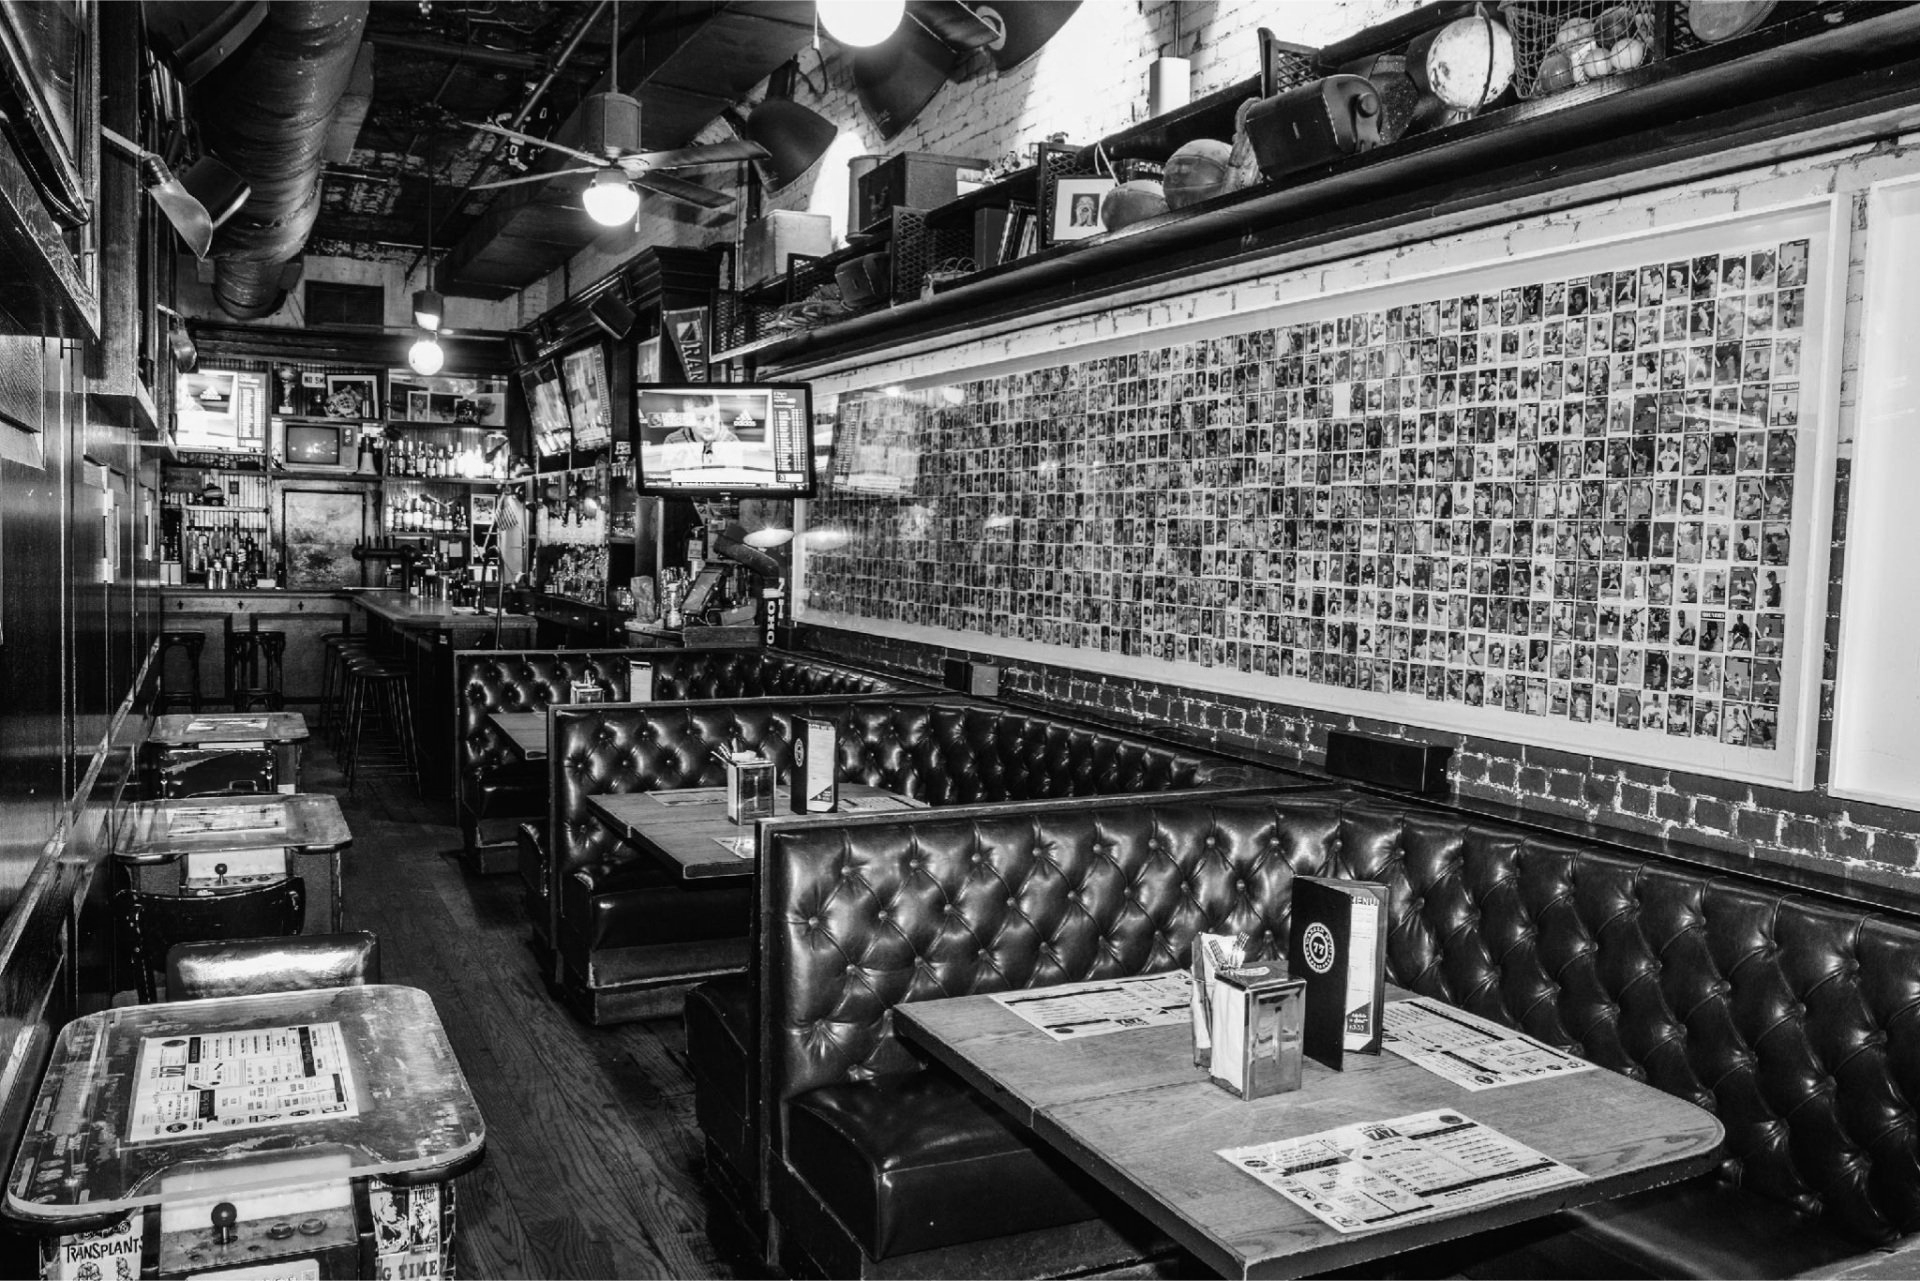 A black and white photo of the bar area of Warren 77, featuring 3 booths, 3 tables, and the bar in the back.